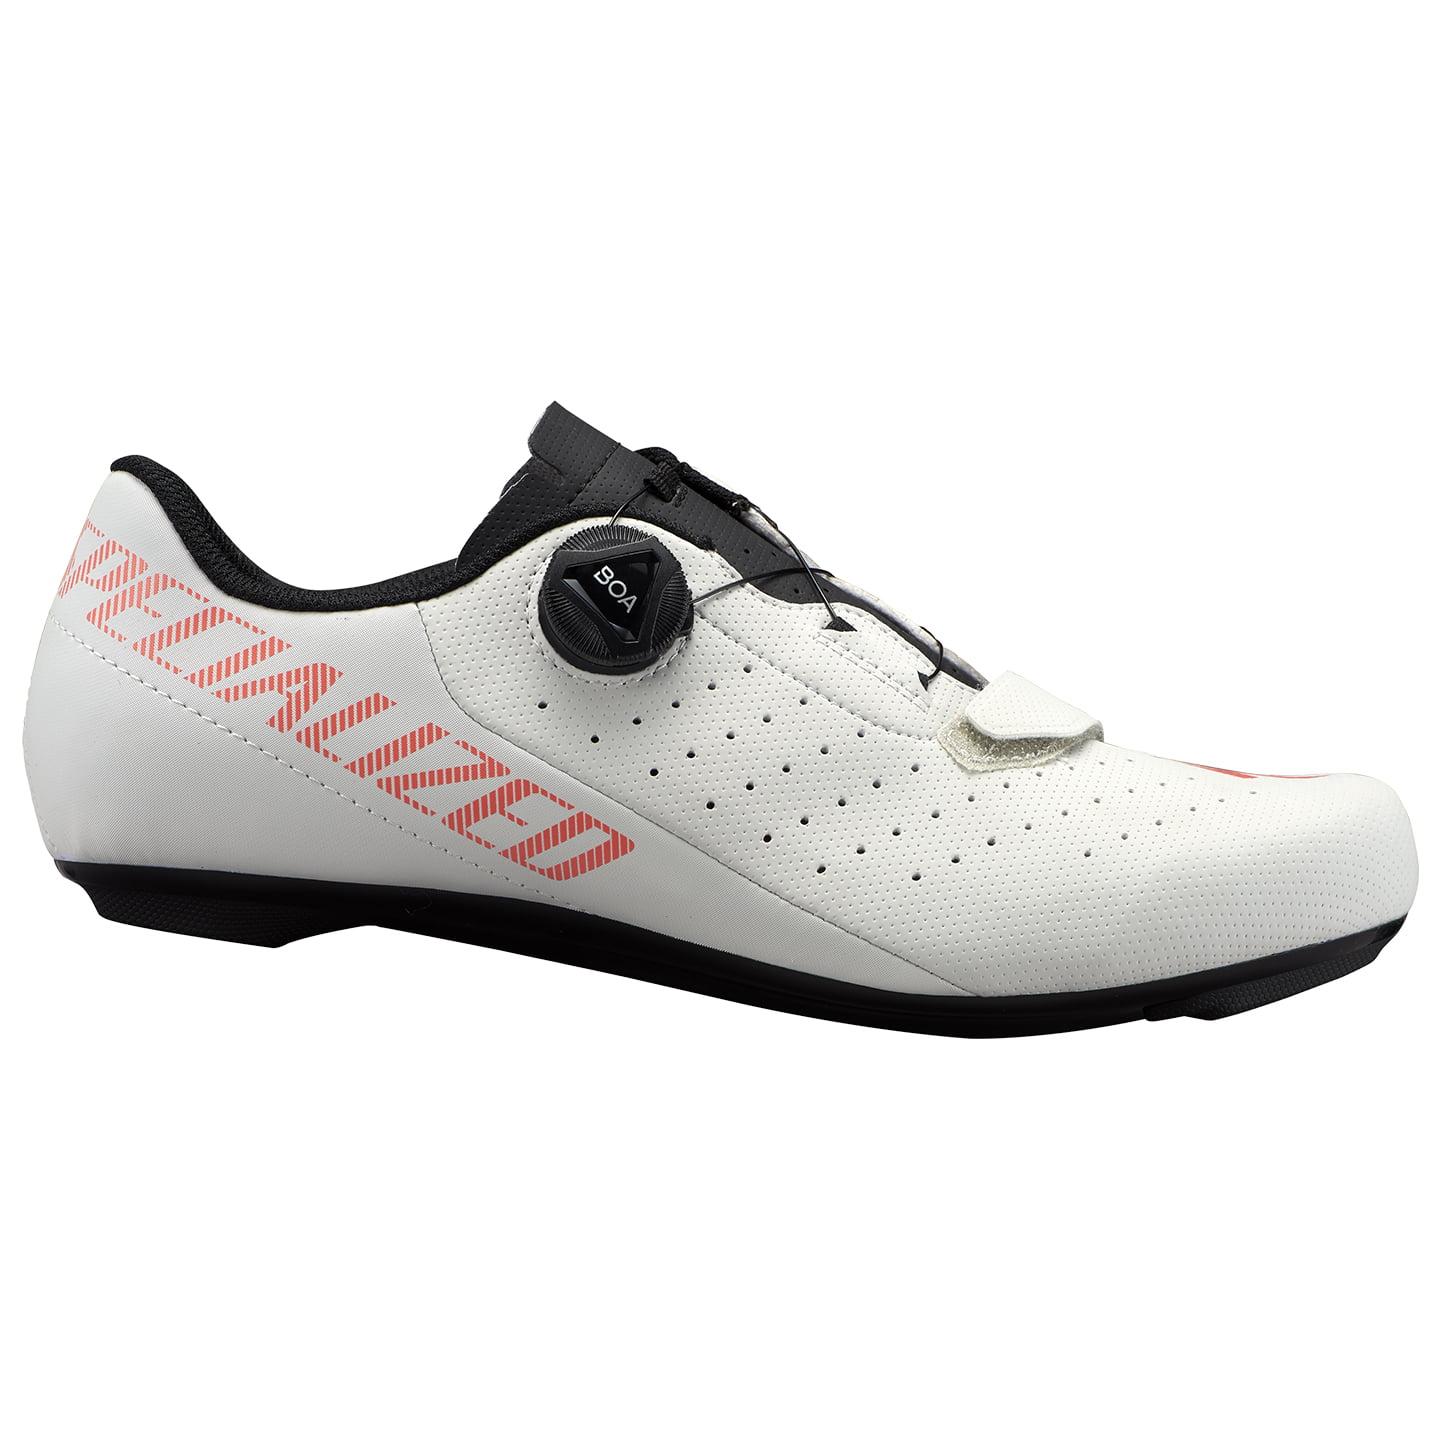 SPECIALIZED Torch 1.0 Road Bike Shoes Road Shoes, for men, size 46, Cycling shoes